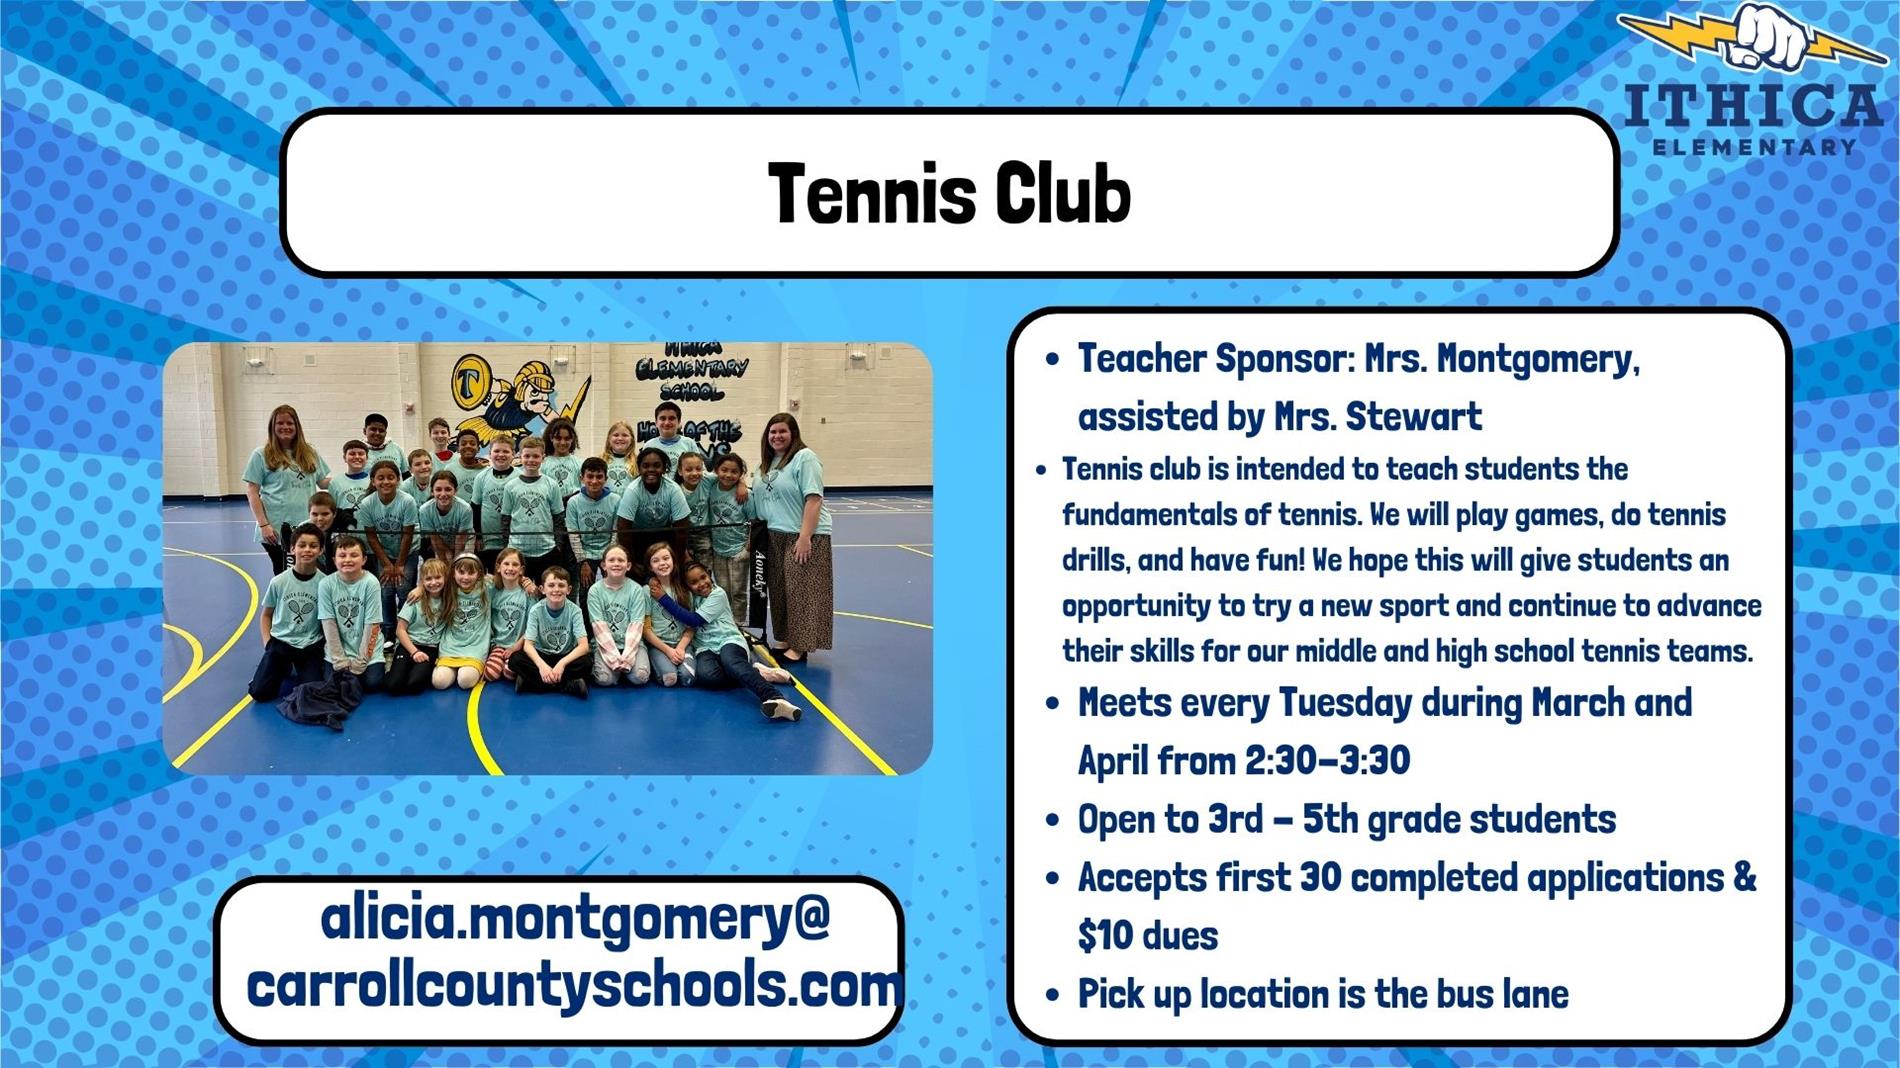 information about the tennis club